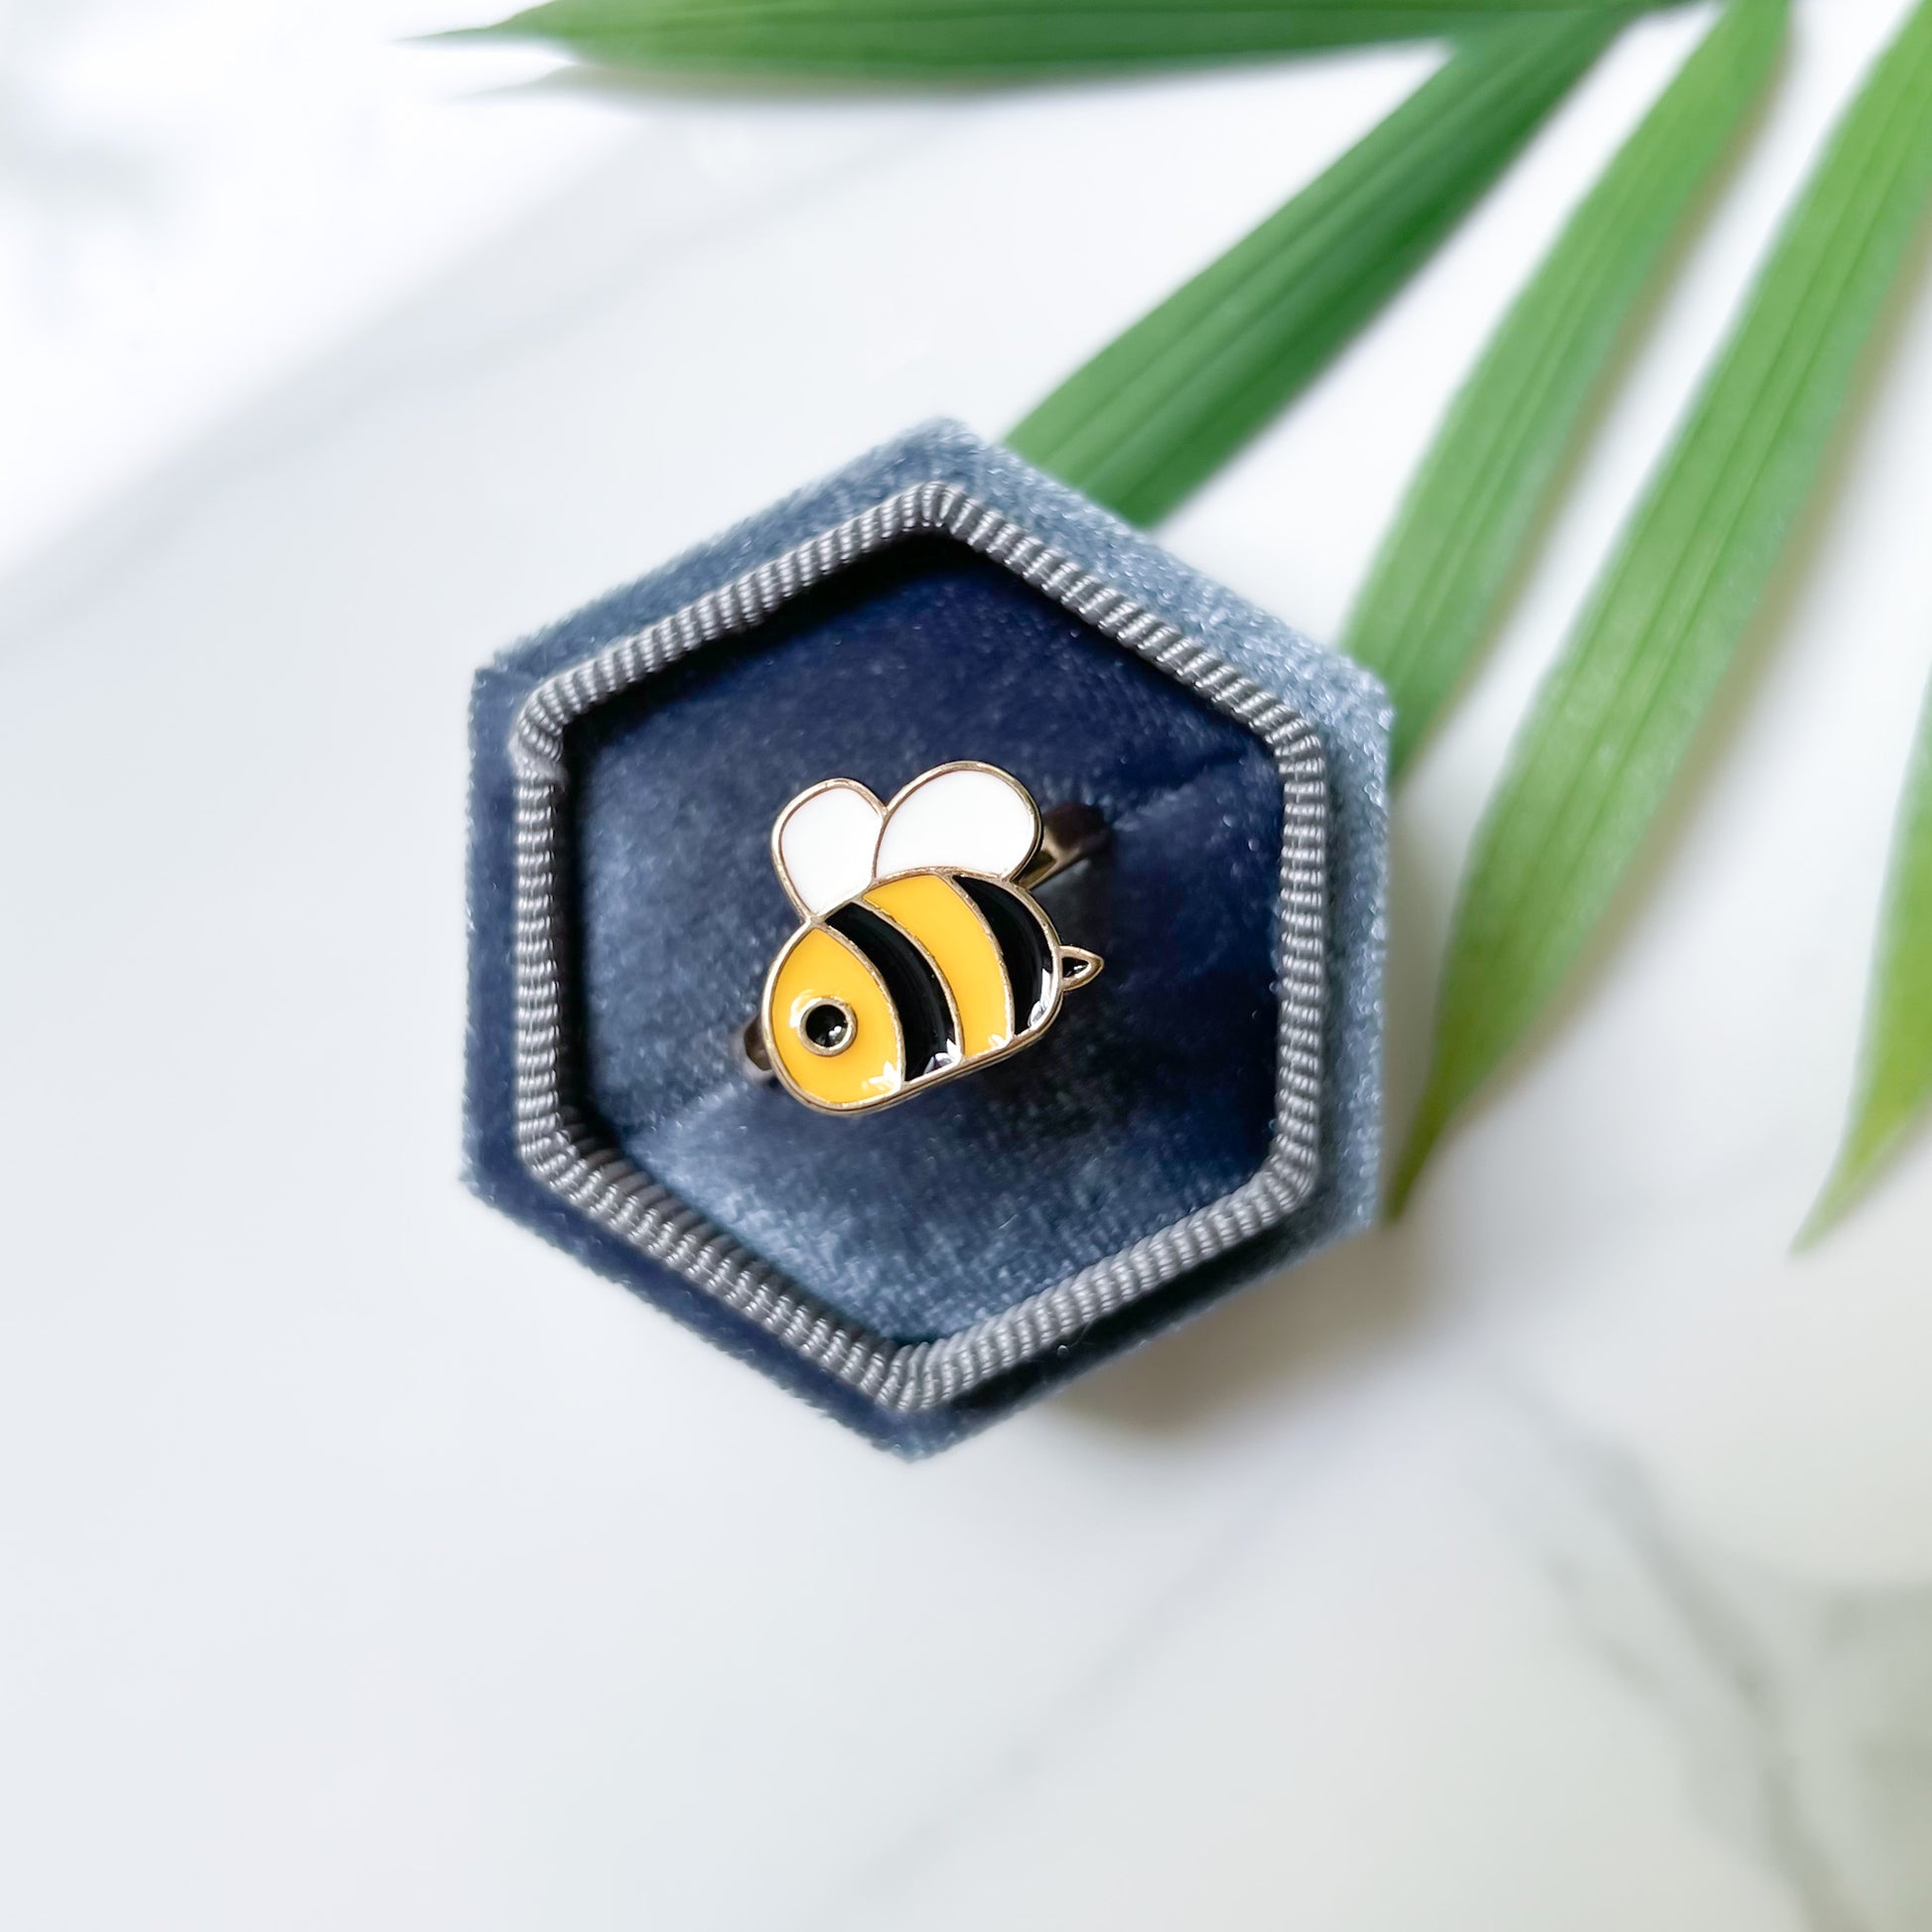 Fidget spinner anti anxiety stress relief ADHD rings in bumble bee design